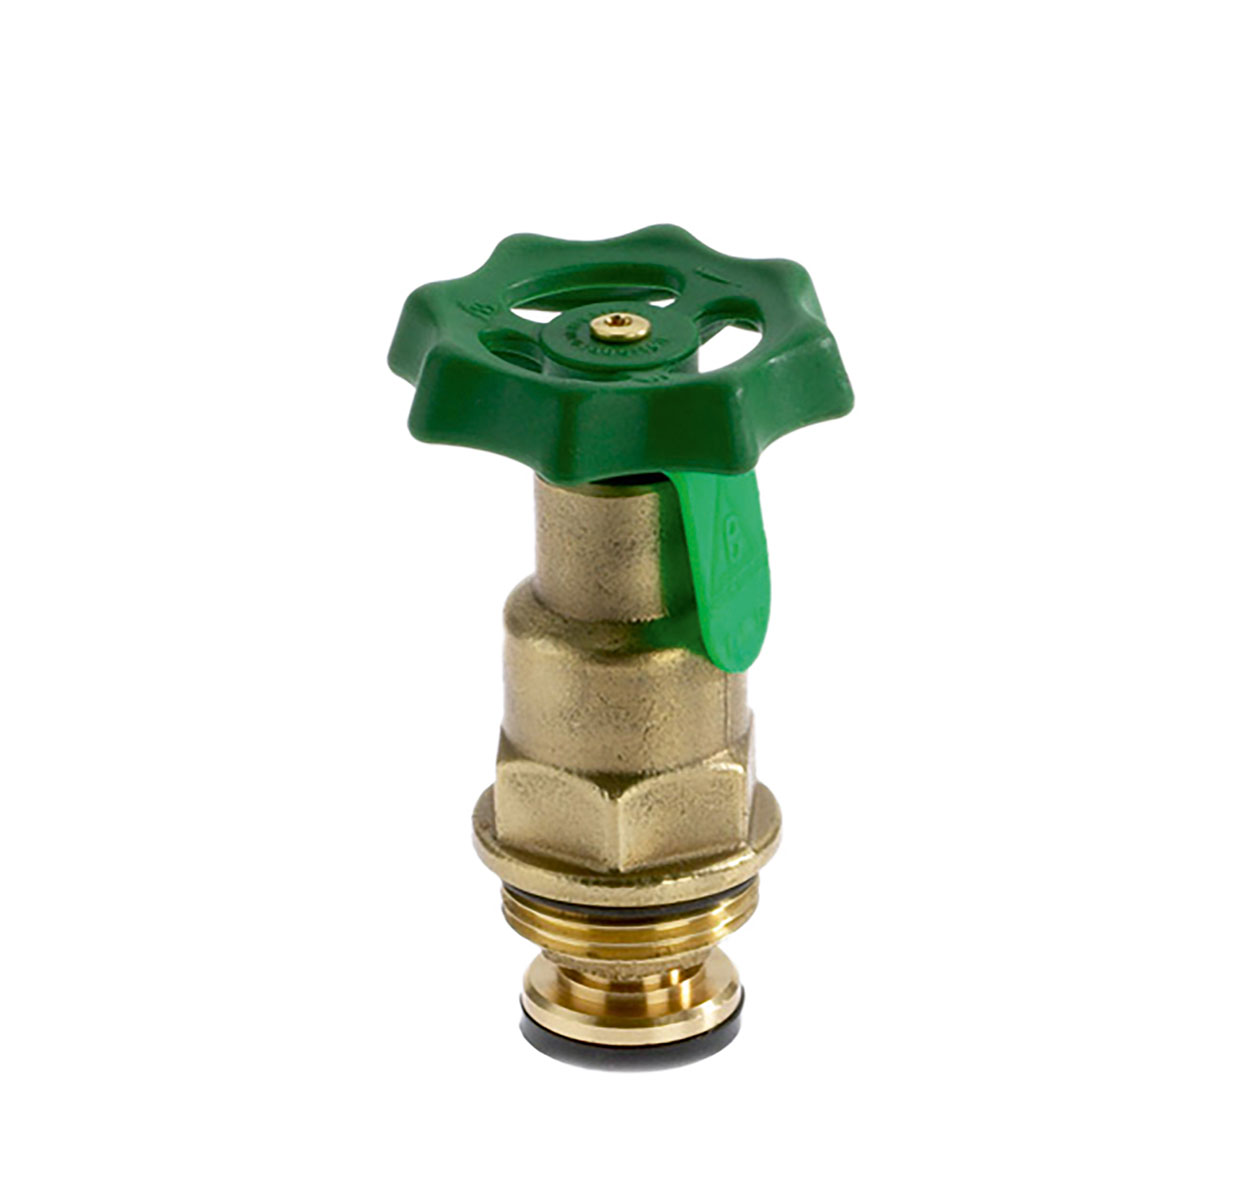 1215800 - Brass Upper-part with grease chamber for Combined Free-flow and Backflow-preventer valves, not-rising spindle